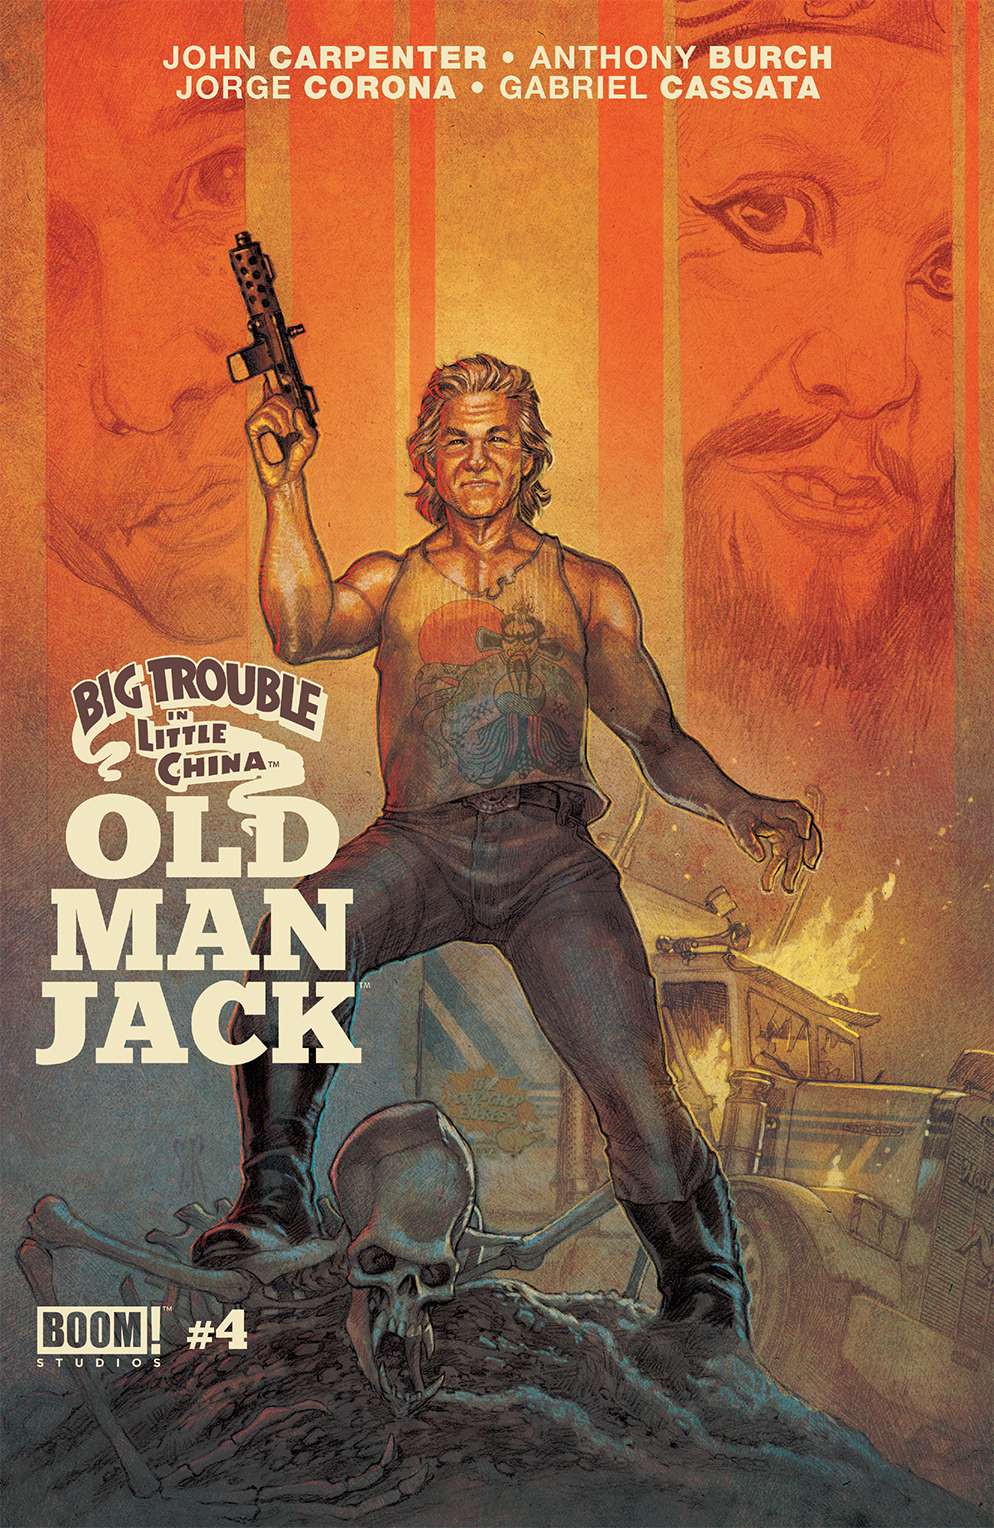 BIG TROUBLE IN LITTLE CHINA OLD MAN JACK #4 MAIN & MIX